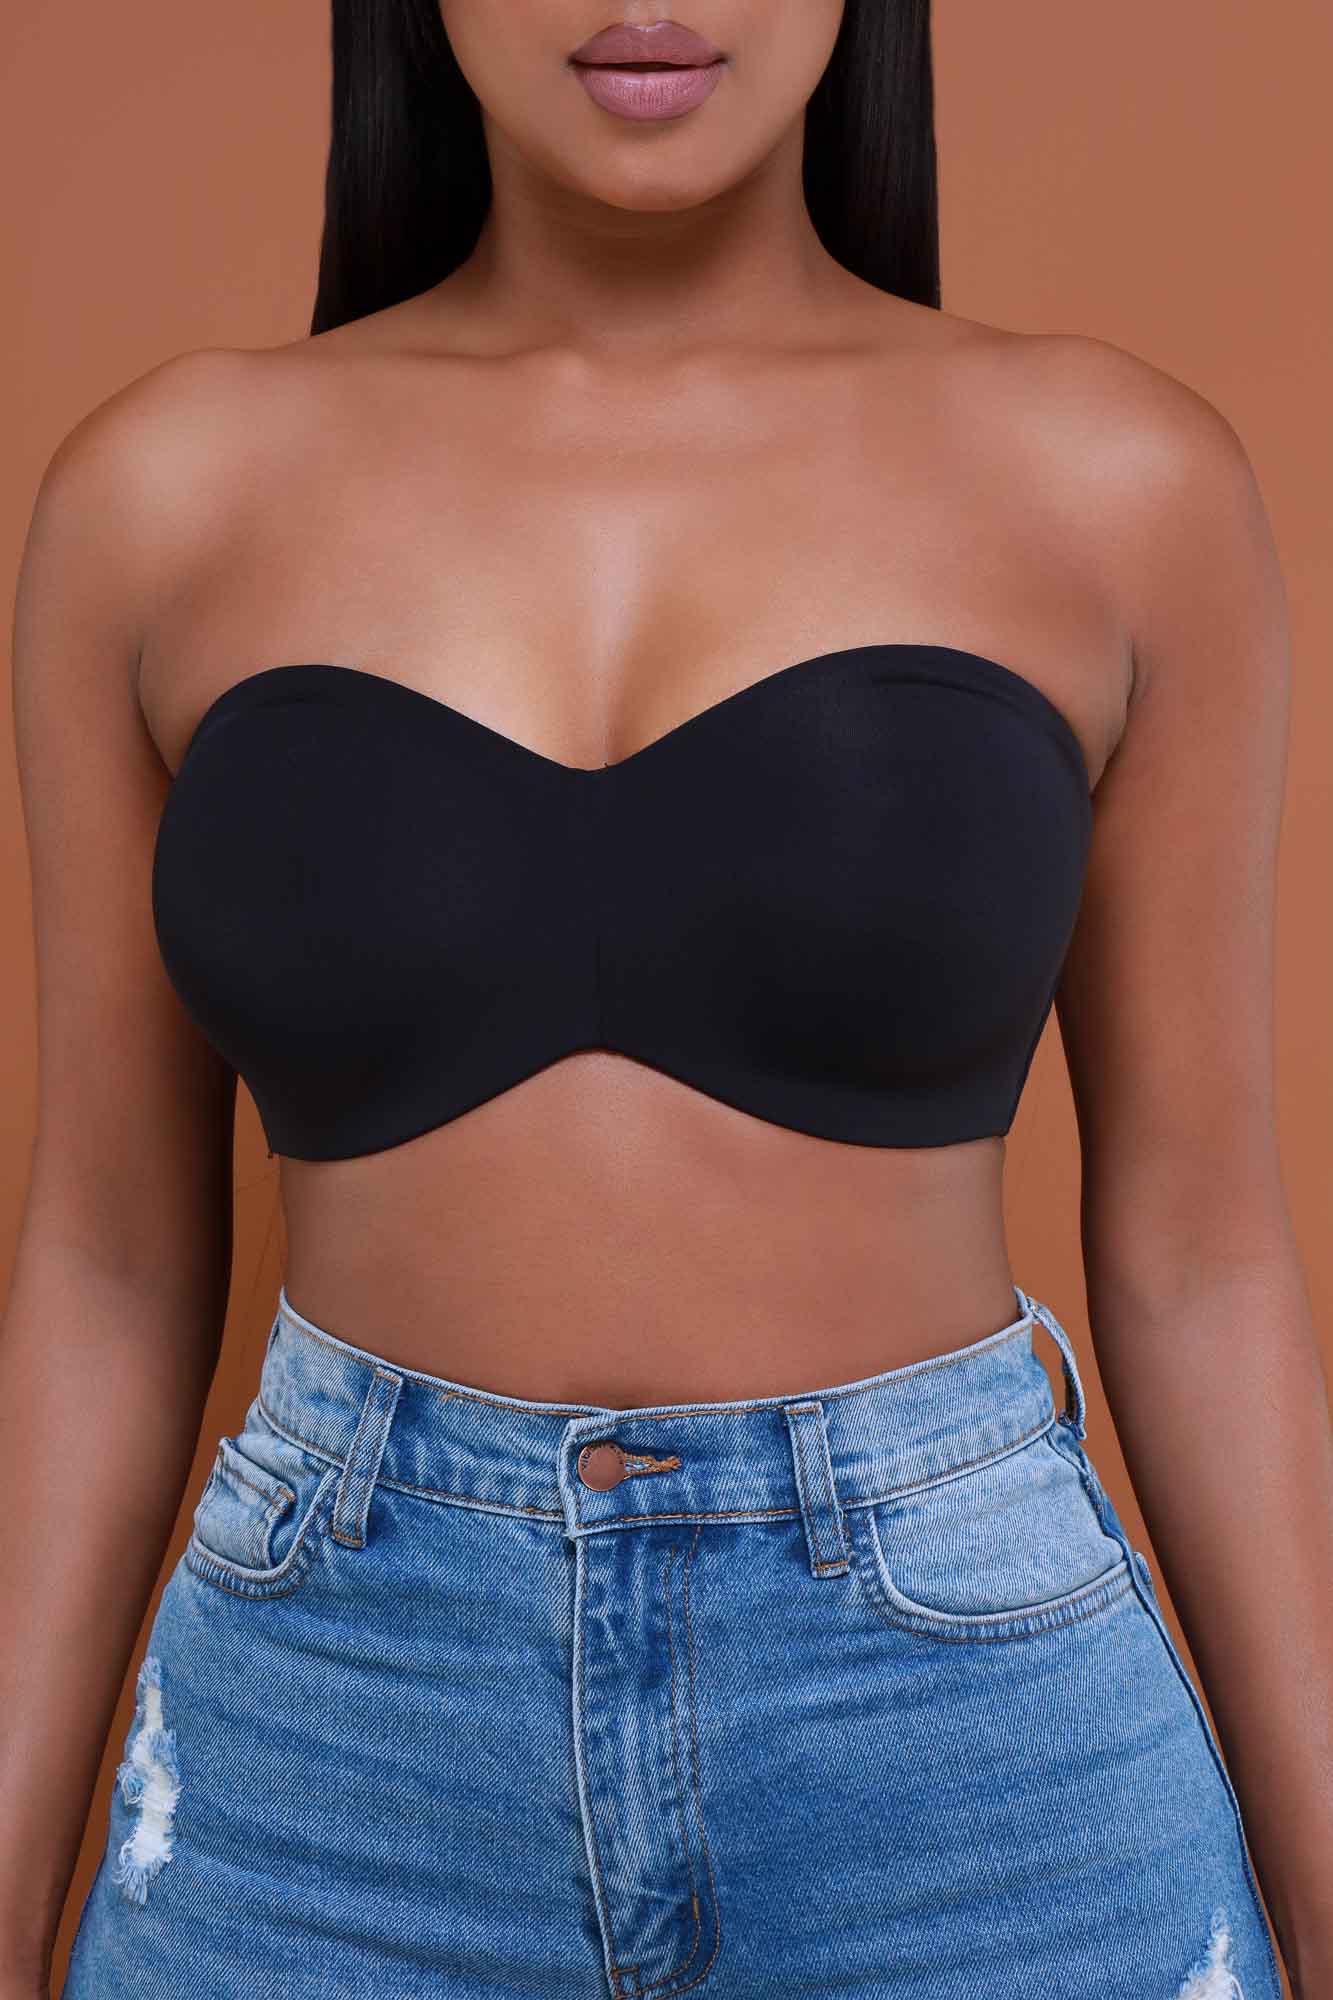 The Best Strapless Bras - 10 Non-Slip Strapless Bras That Won't Fall Or Dig, Rank & Style